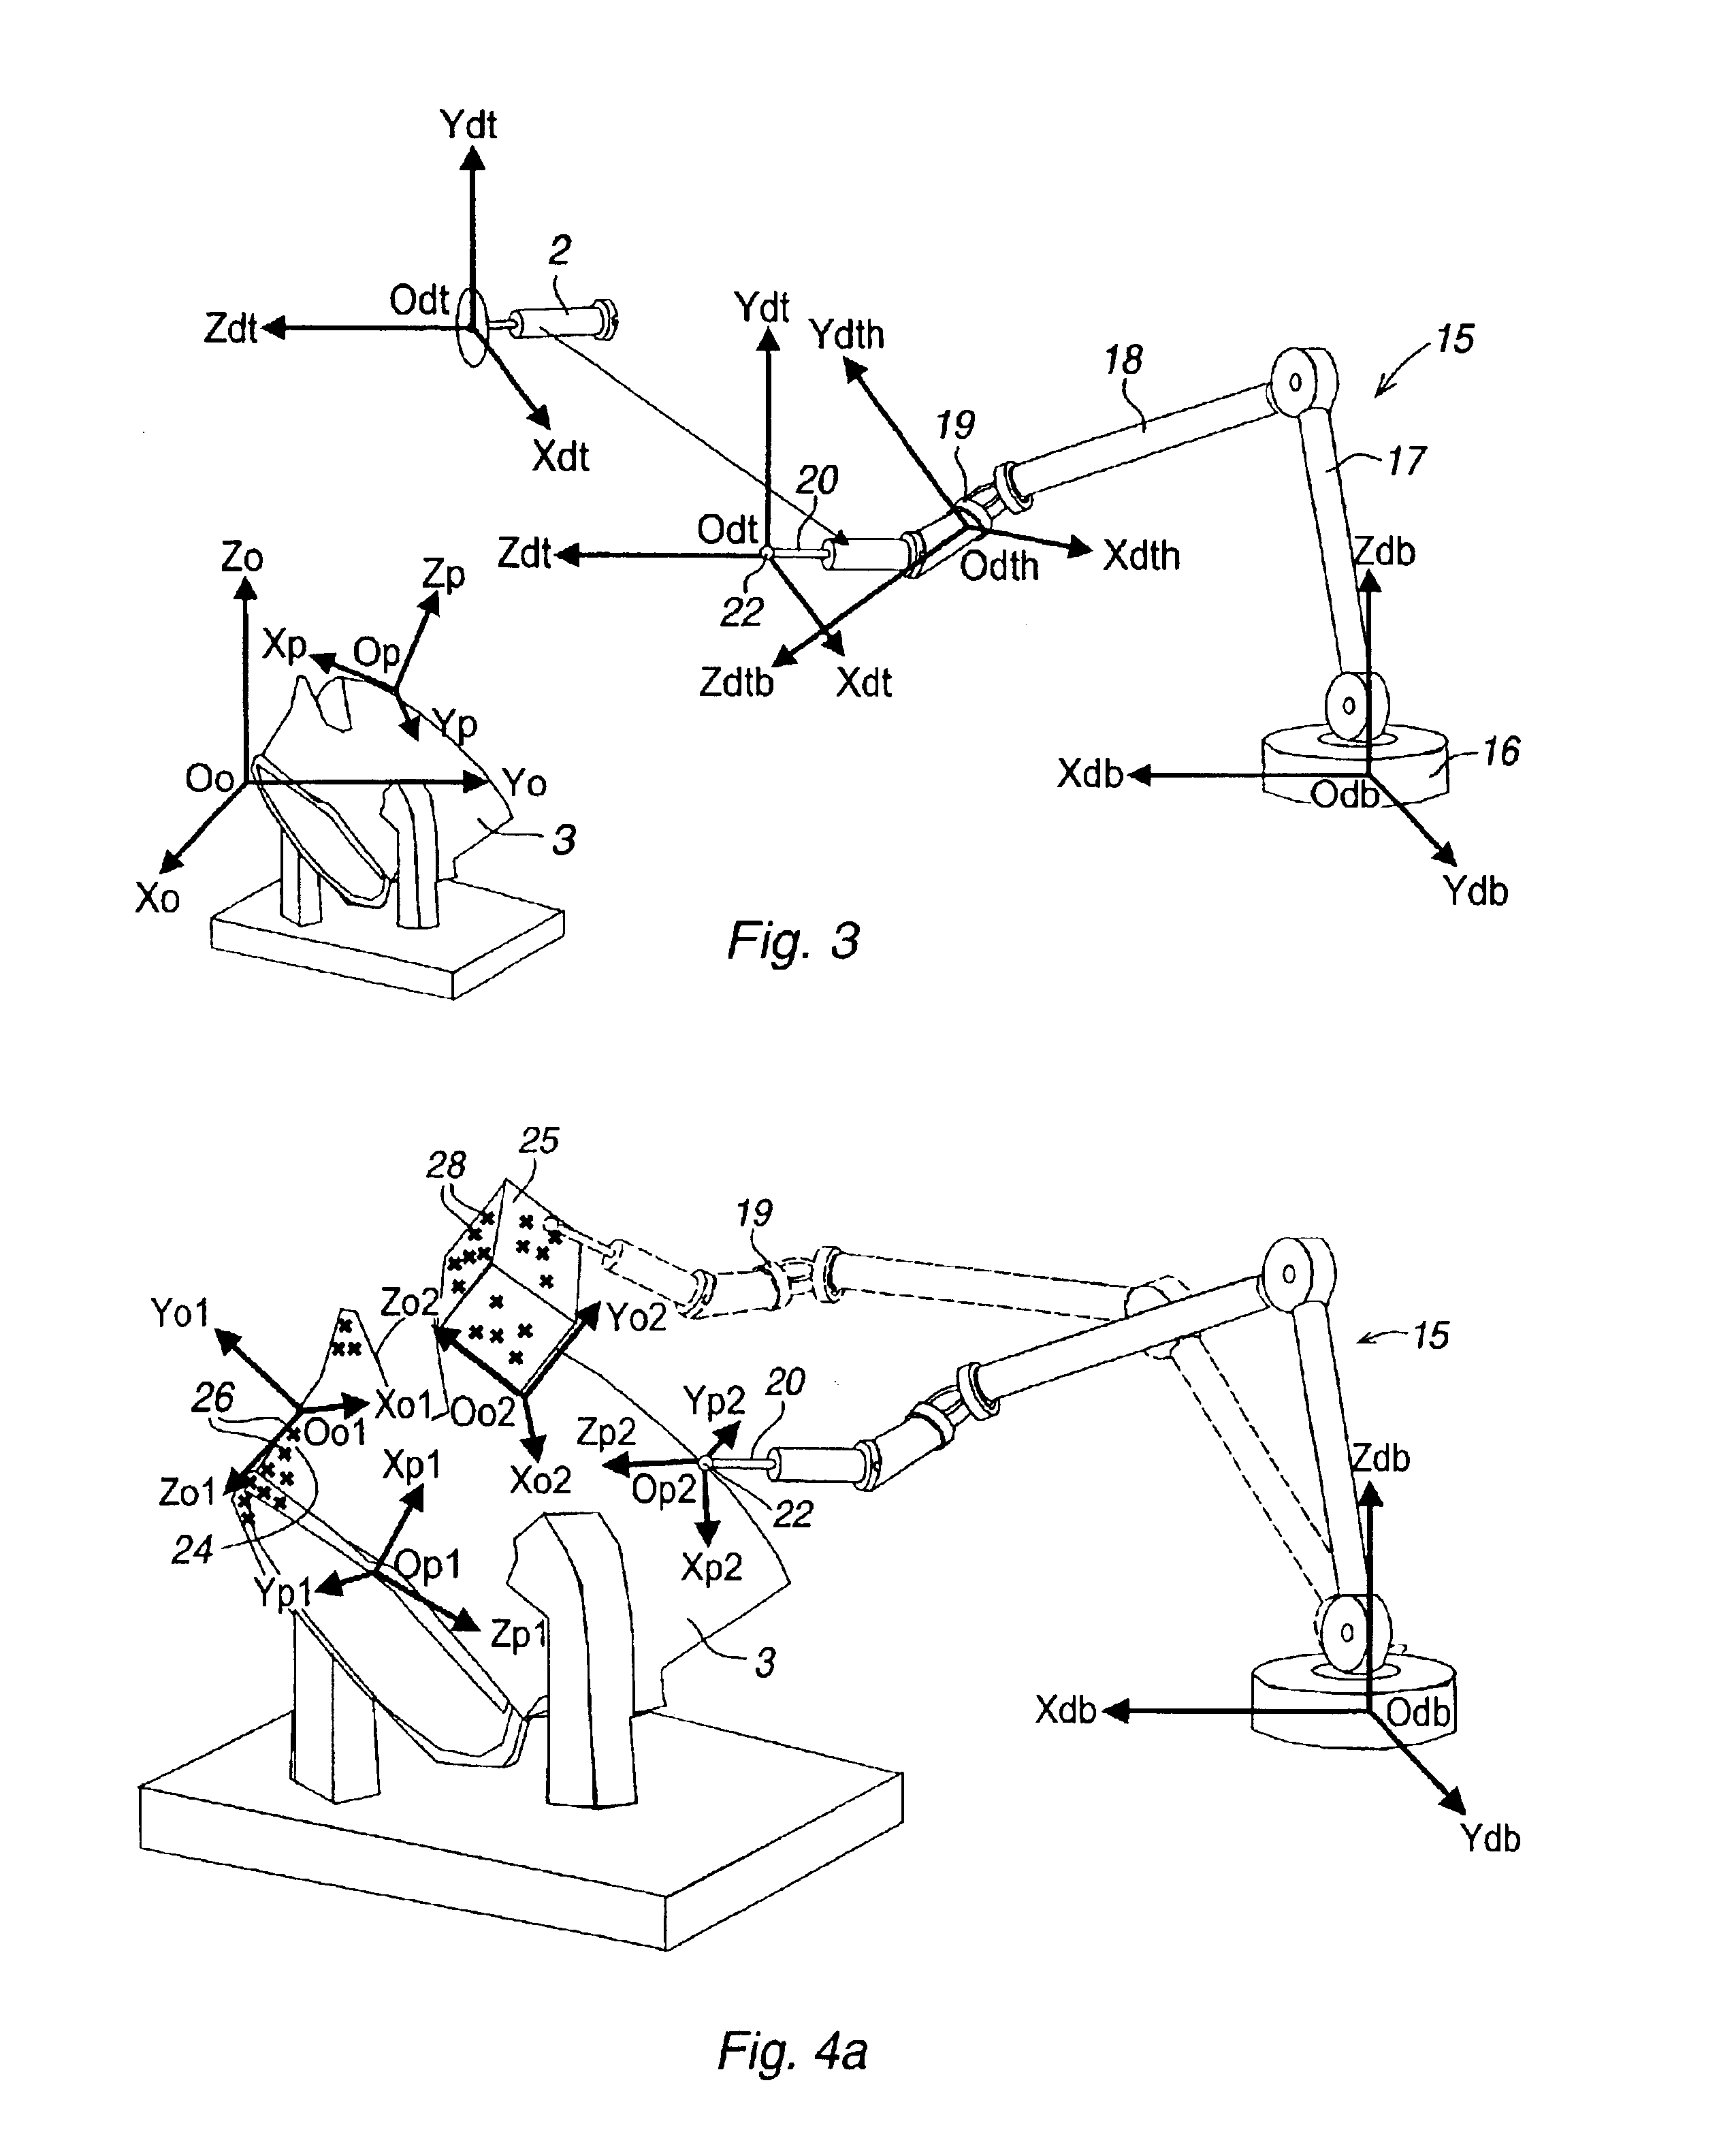 Method for calibrating and programming of a robot application